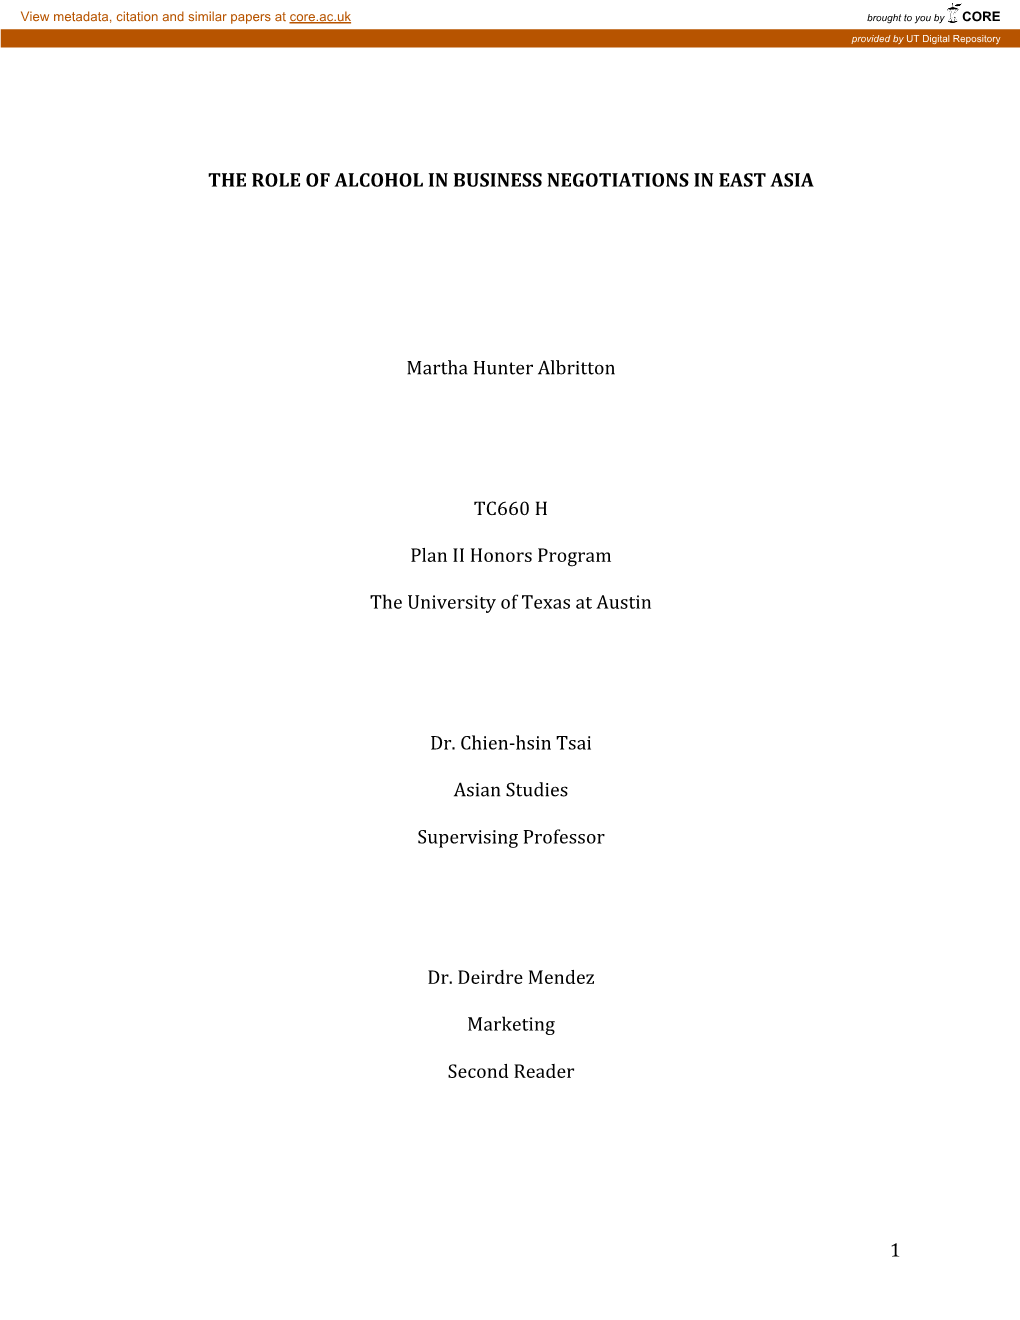 1 the ROLE of ALCOHOL in BUSINESS NEGOTIATIONS in EAST ASIA Martha Hunter